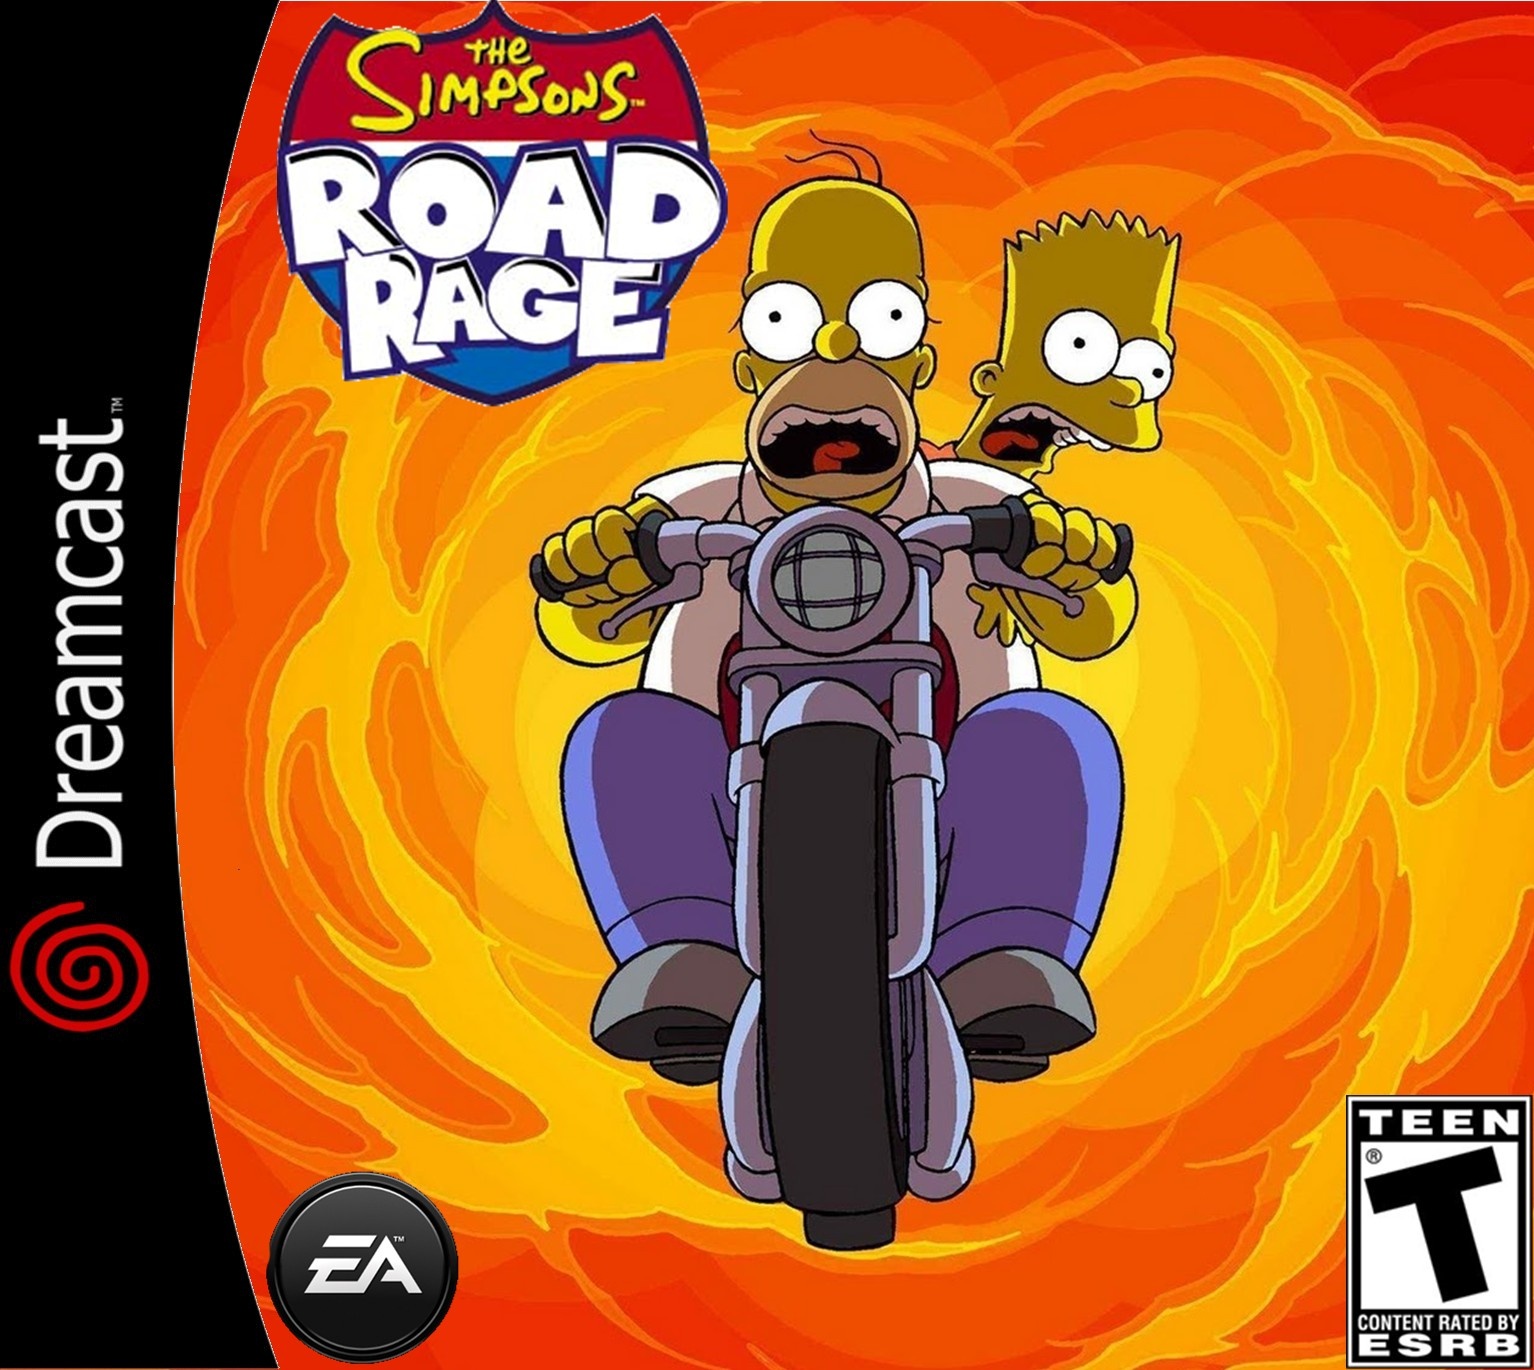 The Simpsons Road Rage box cover